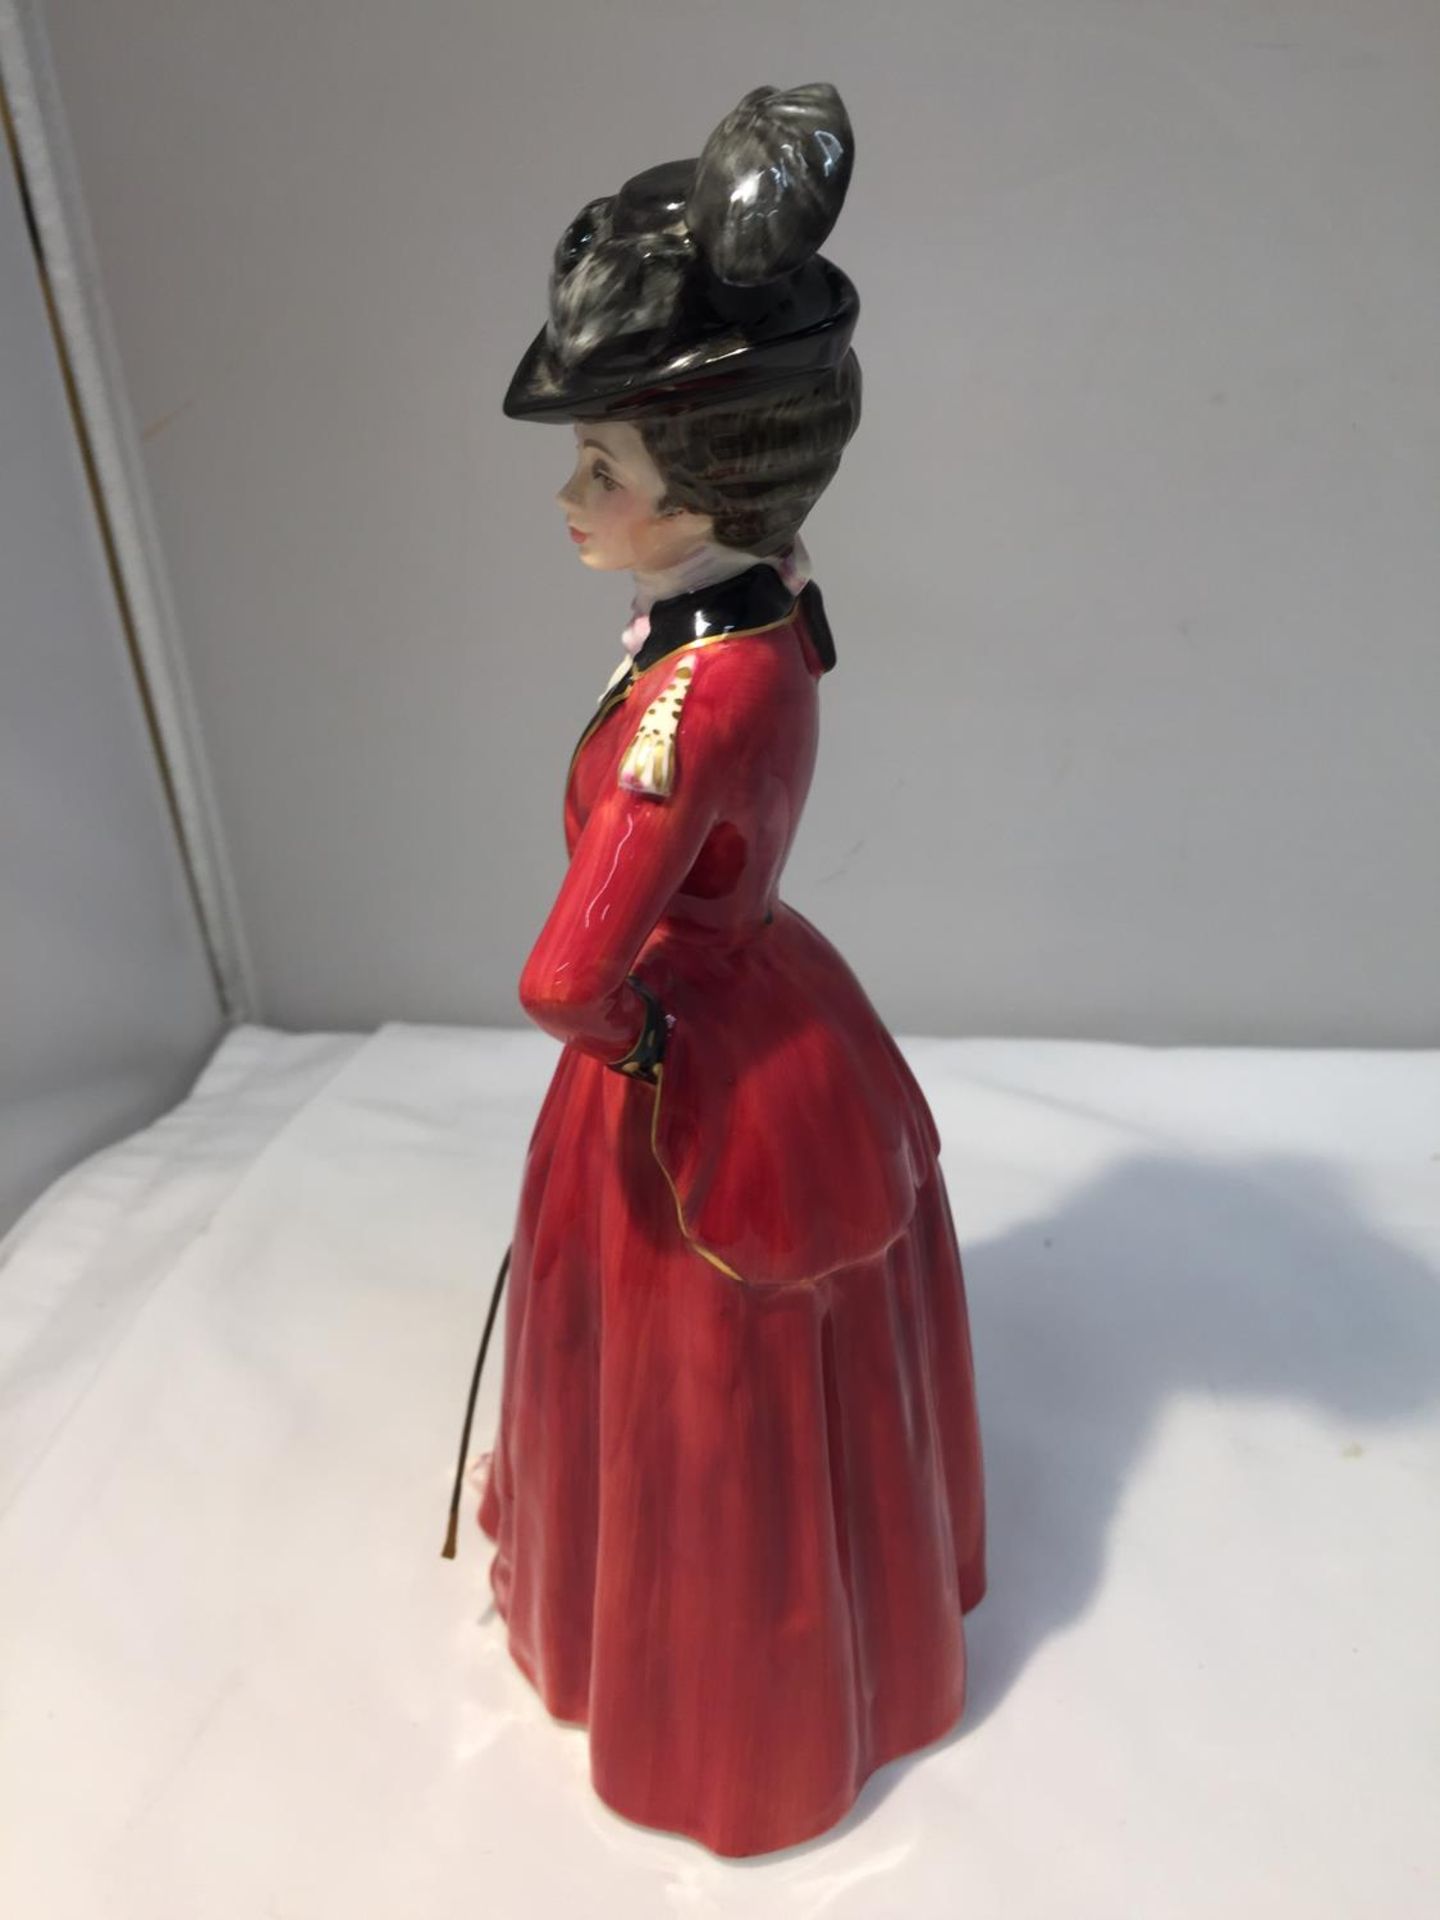 A ROYAL DOULTON FIGURE 'LADY WORSLEY' HN 3318, FROM A COLLECTION OF FOUR FIGURES, LIMITED EDITION - Image 2 of 7